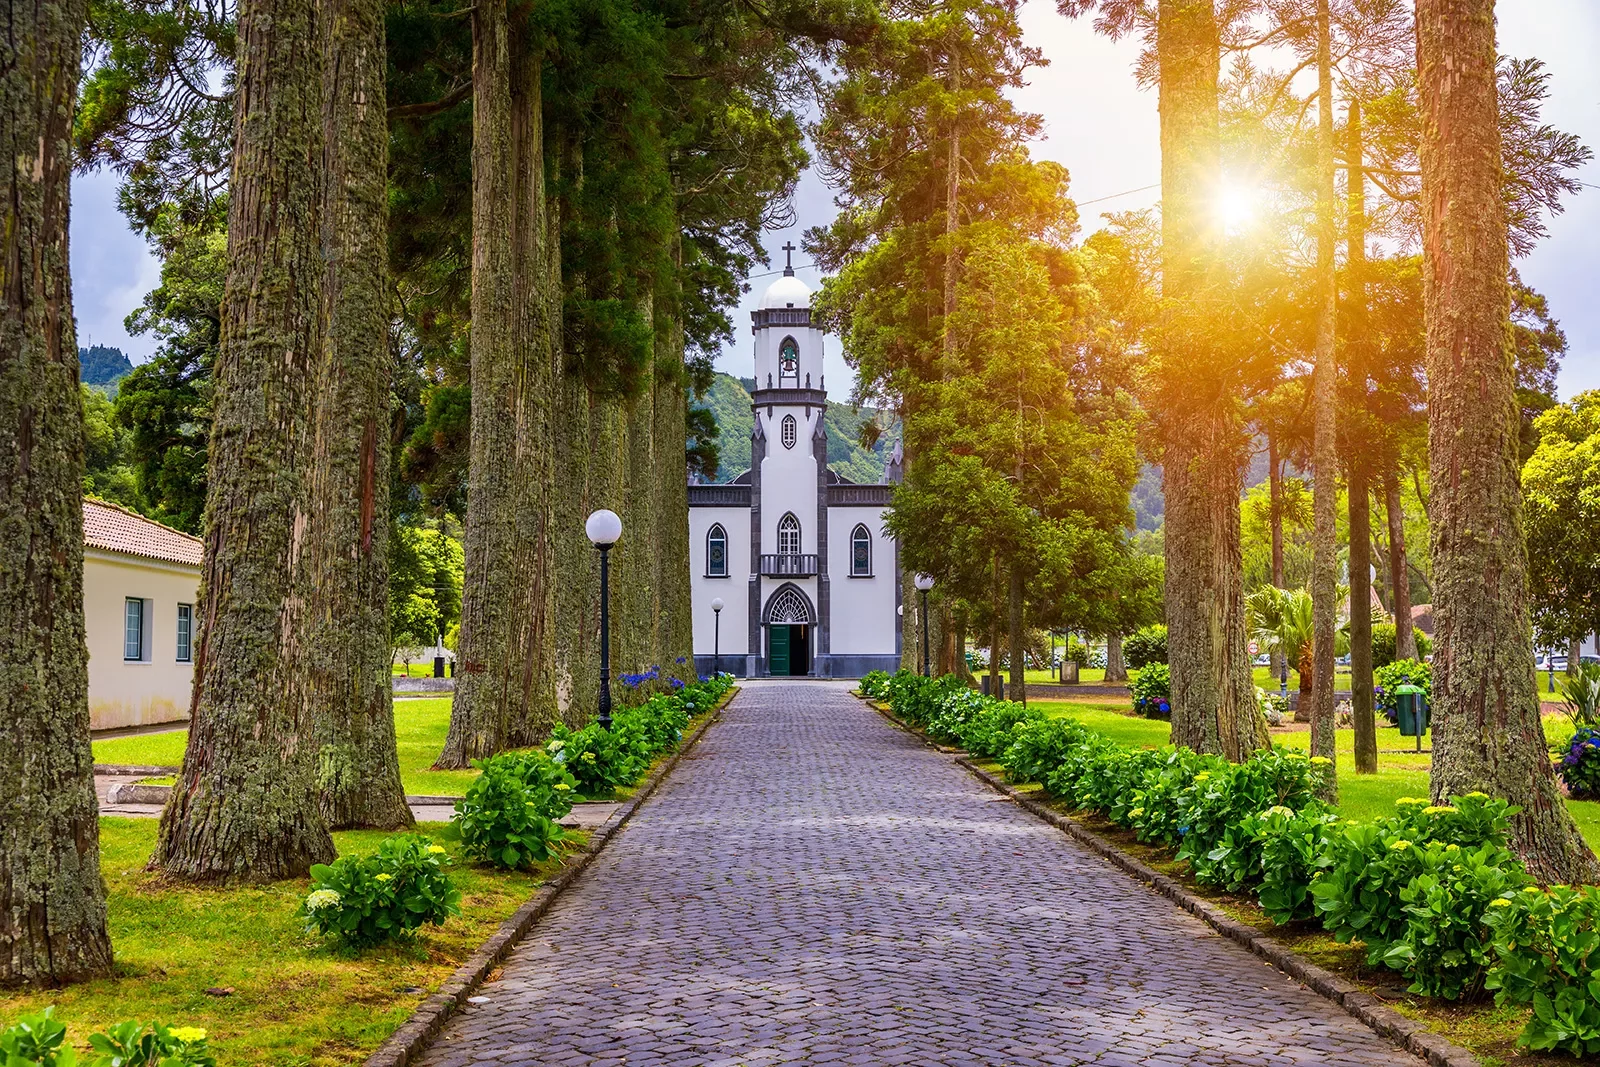 Church of Sao Nicolau with an alley of tall trees and hydrangea flowers in Sete cidades on Sao Miguel island, Azores, Portugal. Parish Church of St. Nicholas, Sete Cidades, Azores.